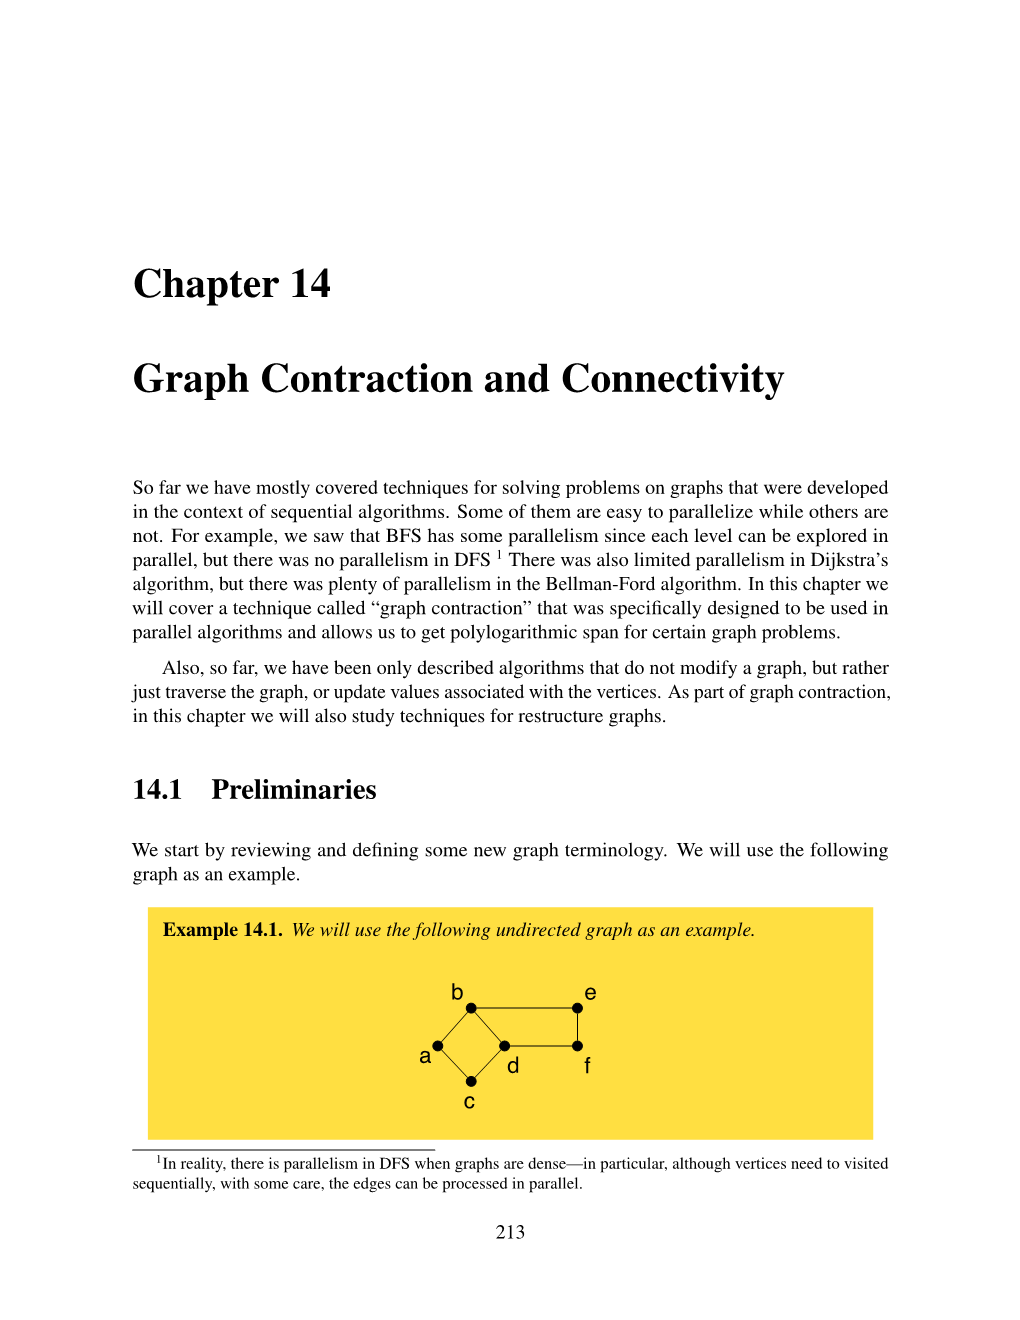 Chapter 14 Graph Contraction and Connectivity